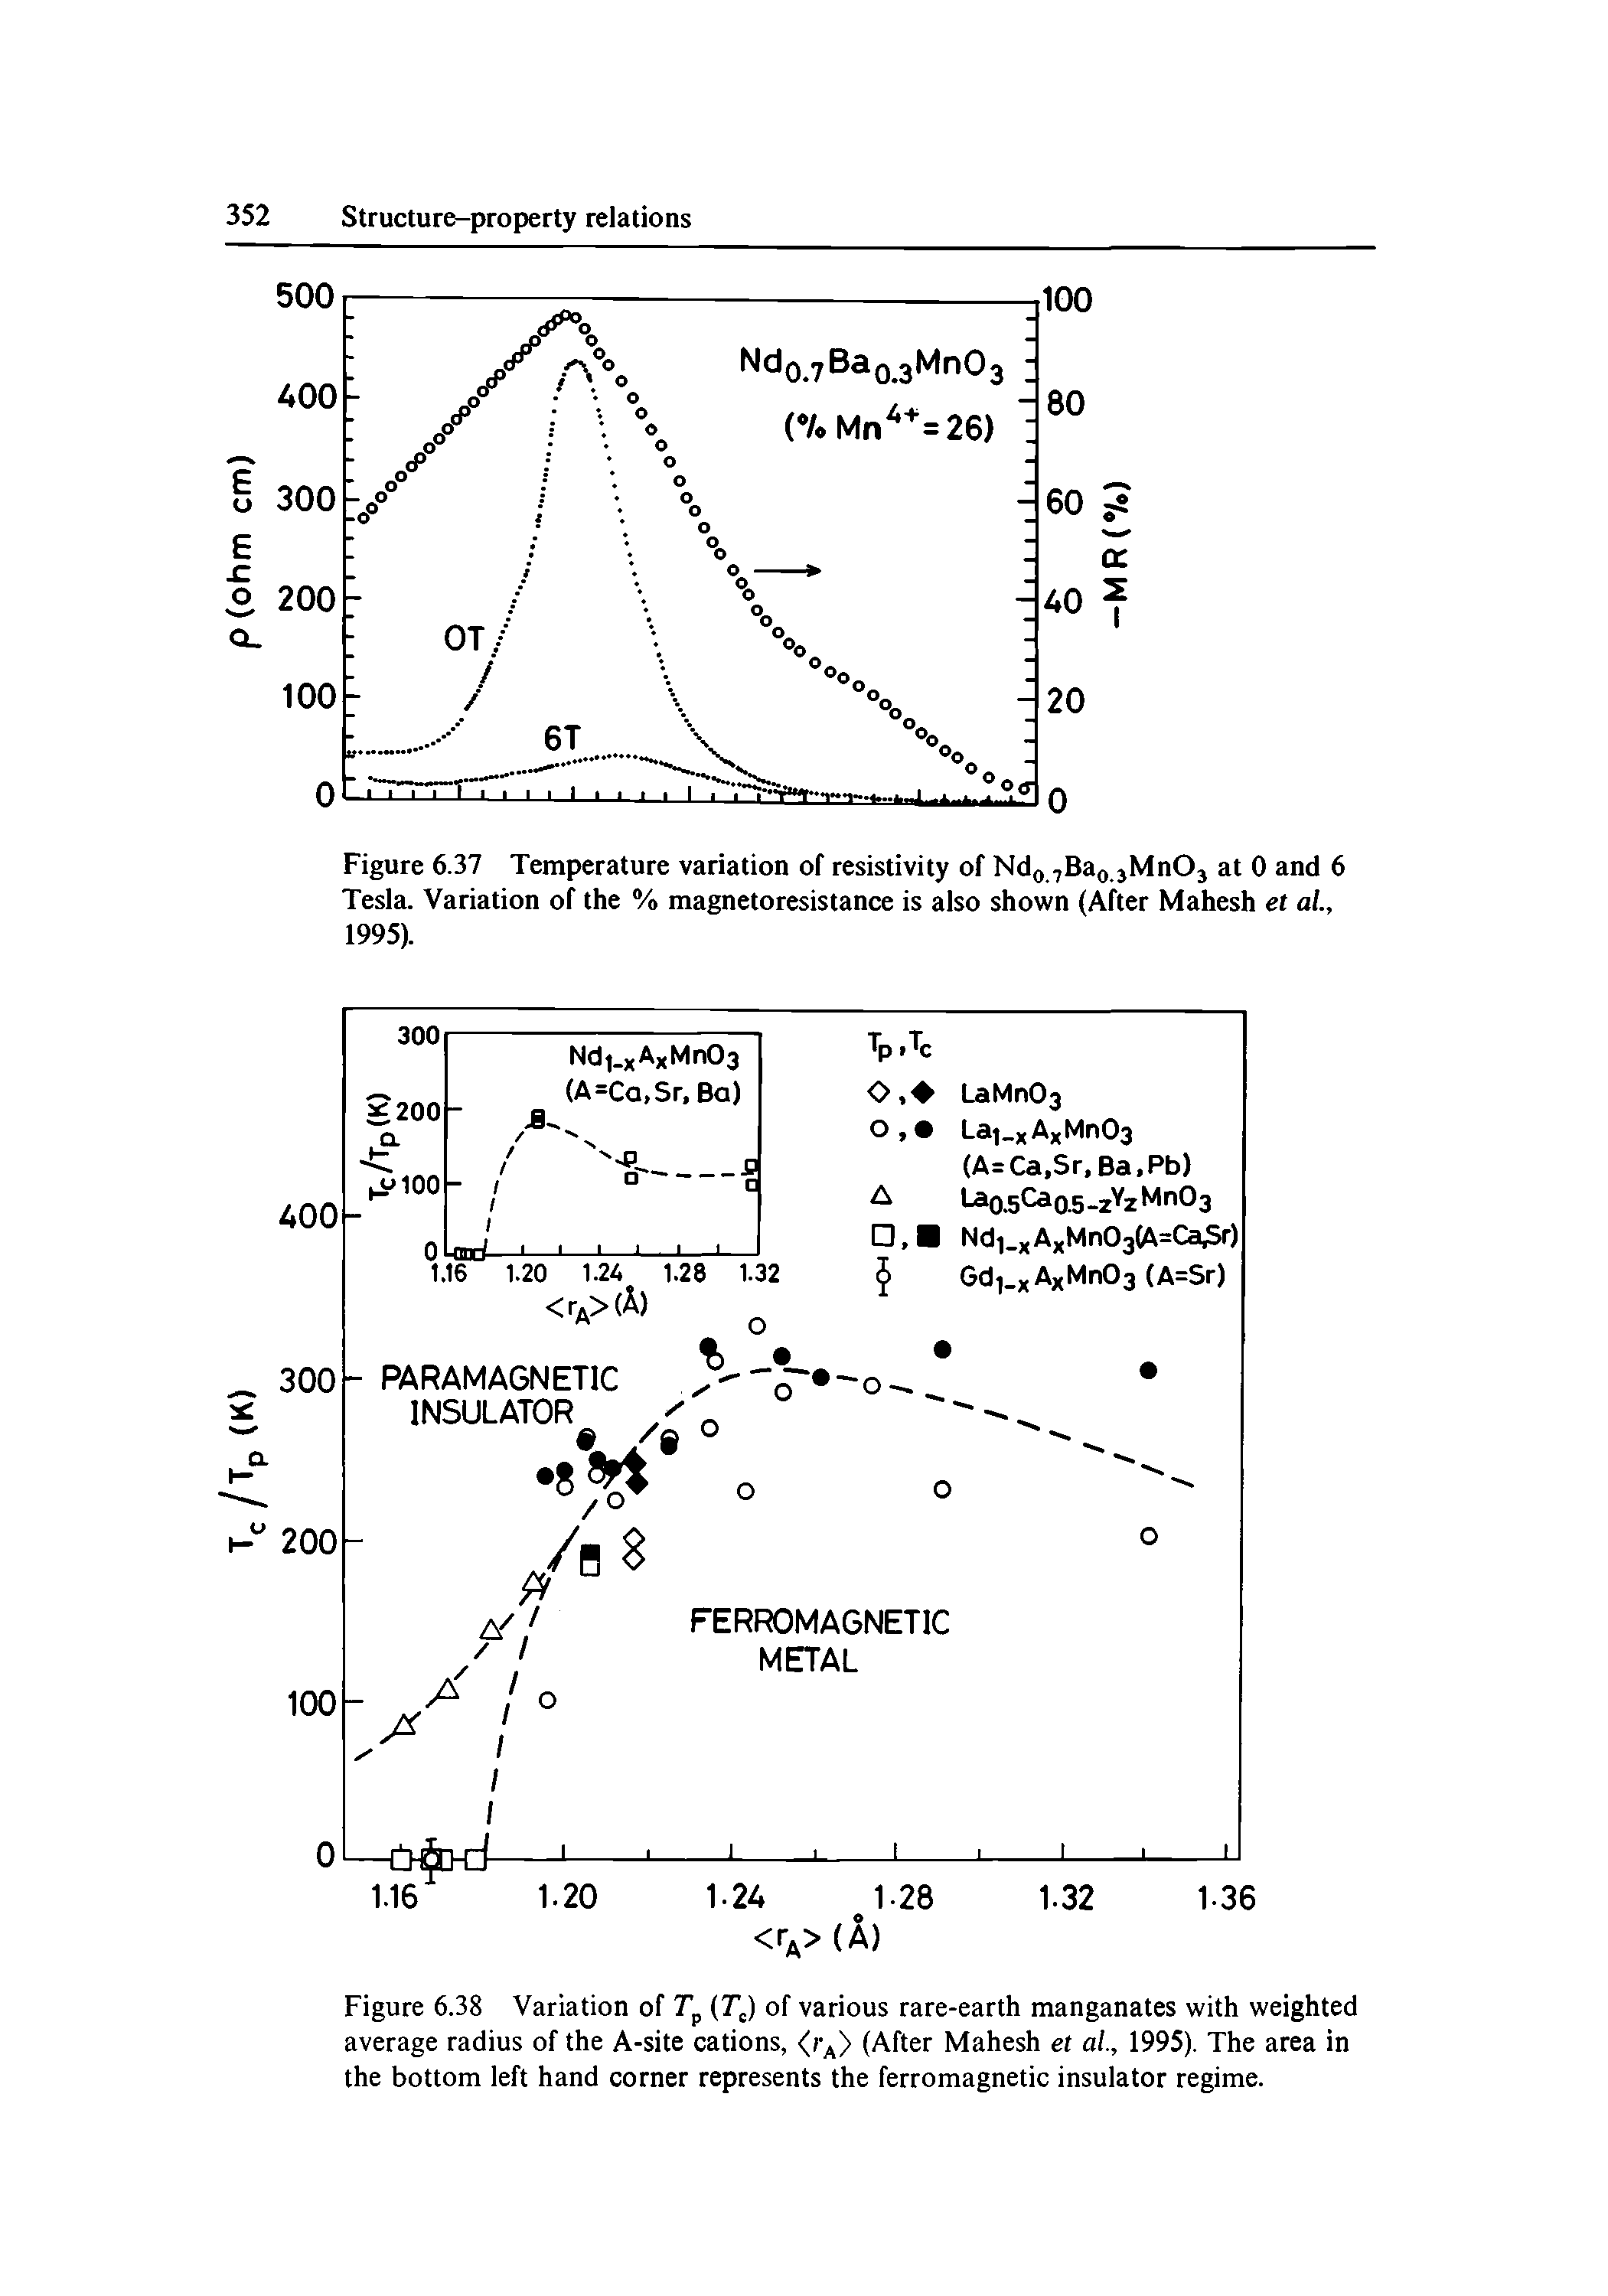 Figure 6.38 Variation of (TJ of various rare-earth manganates with weighted average radius of the A-site cations, <r > (After Mahesh et ai, 1995). The area in the bottom left hand corner represents the ferromagnetic insulator regime.